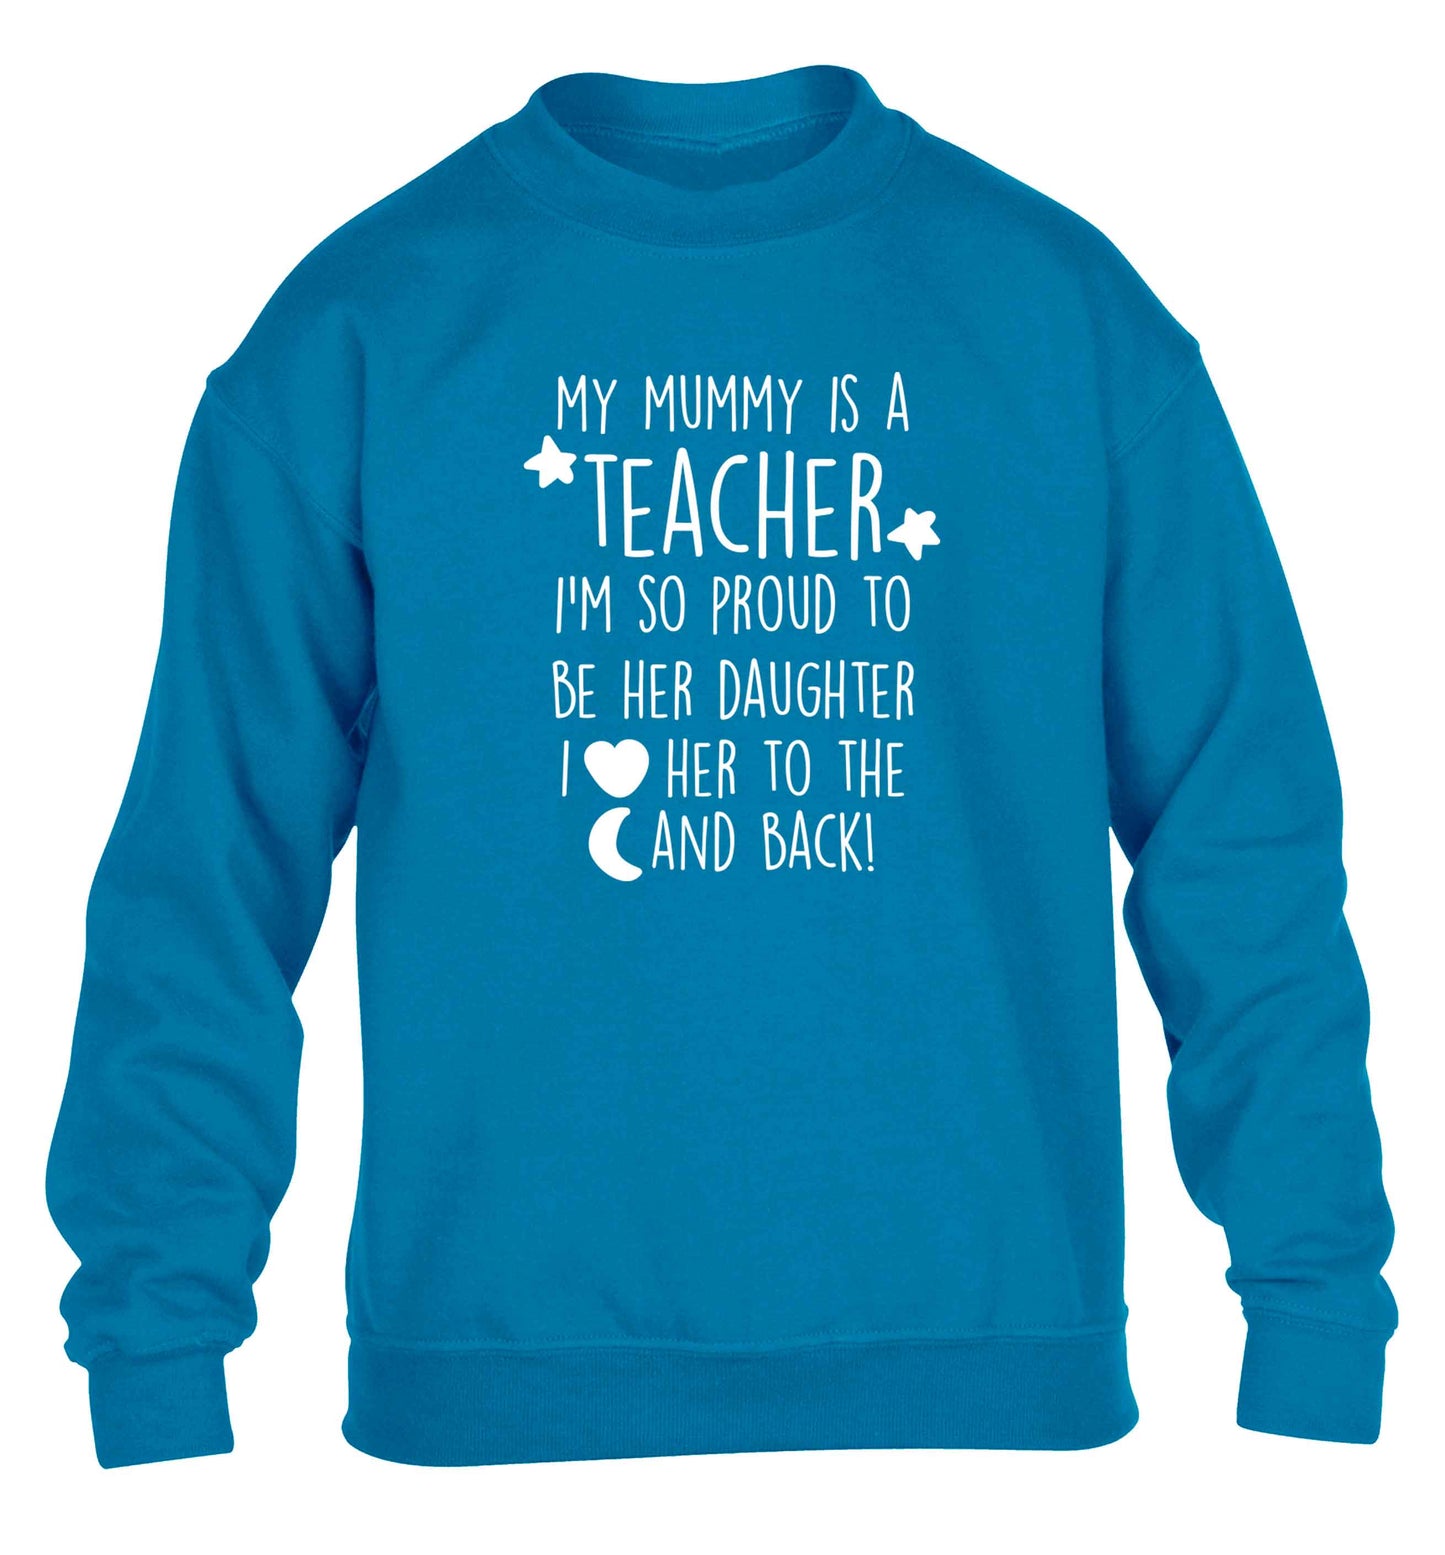 My mummy is a teacher I'm so proud to be her daughter I love her to the moon and back children's blue sweater 12-13 Years